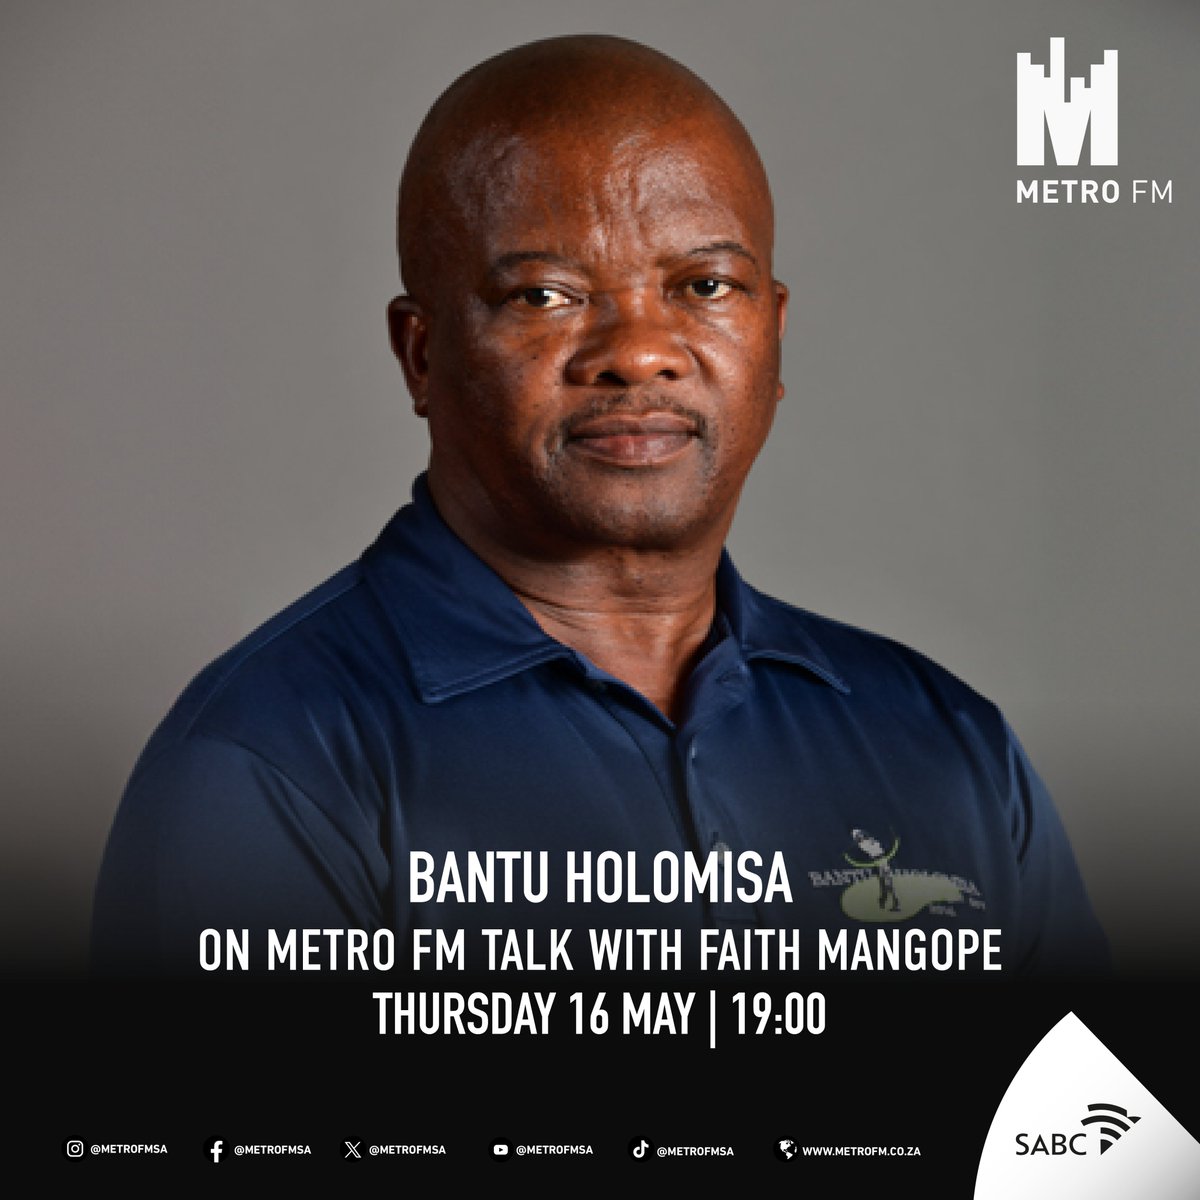 UDM Leader, Bantu Holomisa joins @FaithMangope In-Studio to unpack his plans to fix the Eastern Cape as he vies for the premier seats on May 29.#METROFMTalk